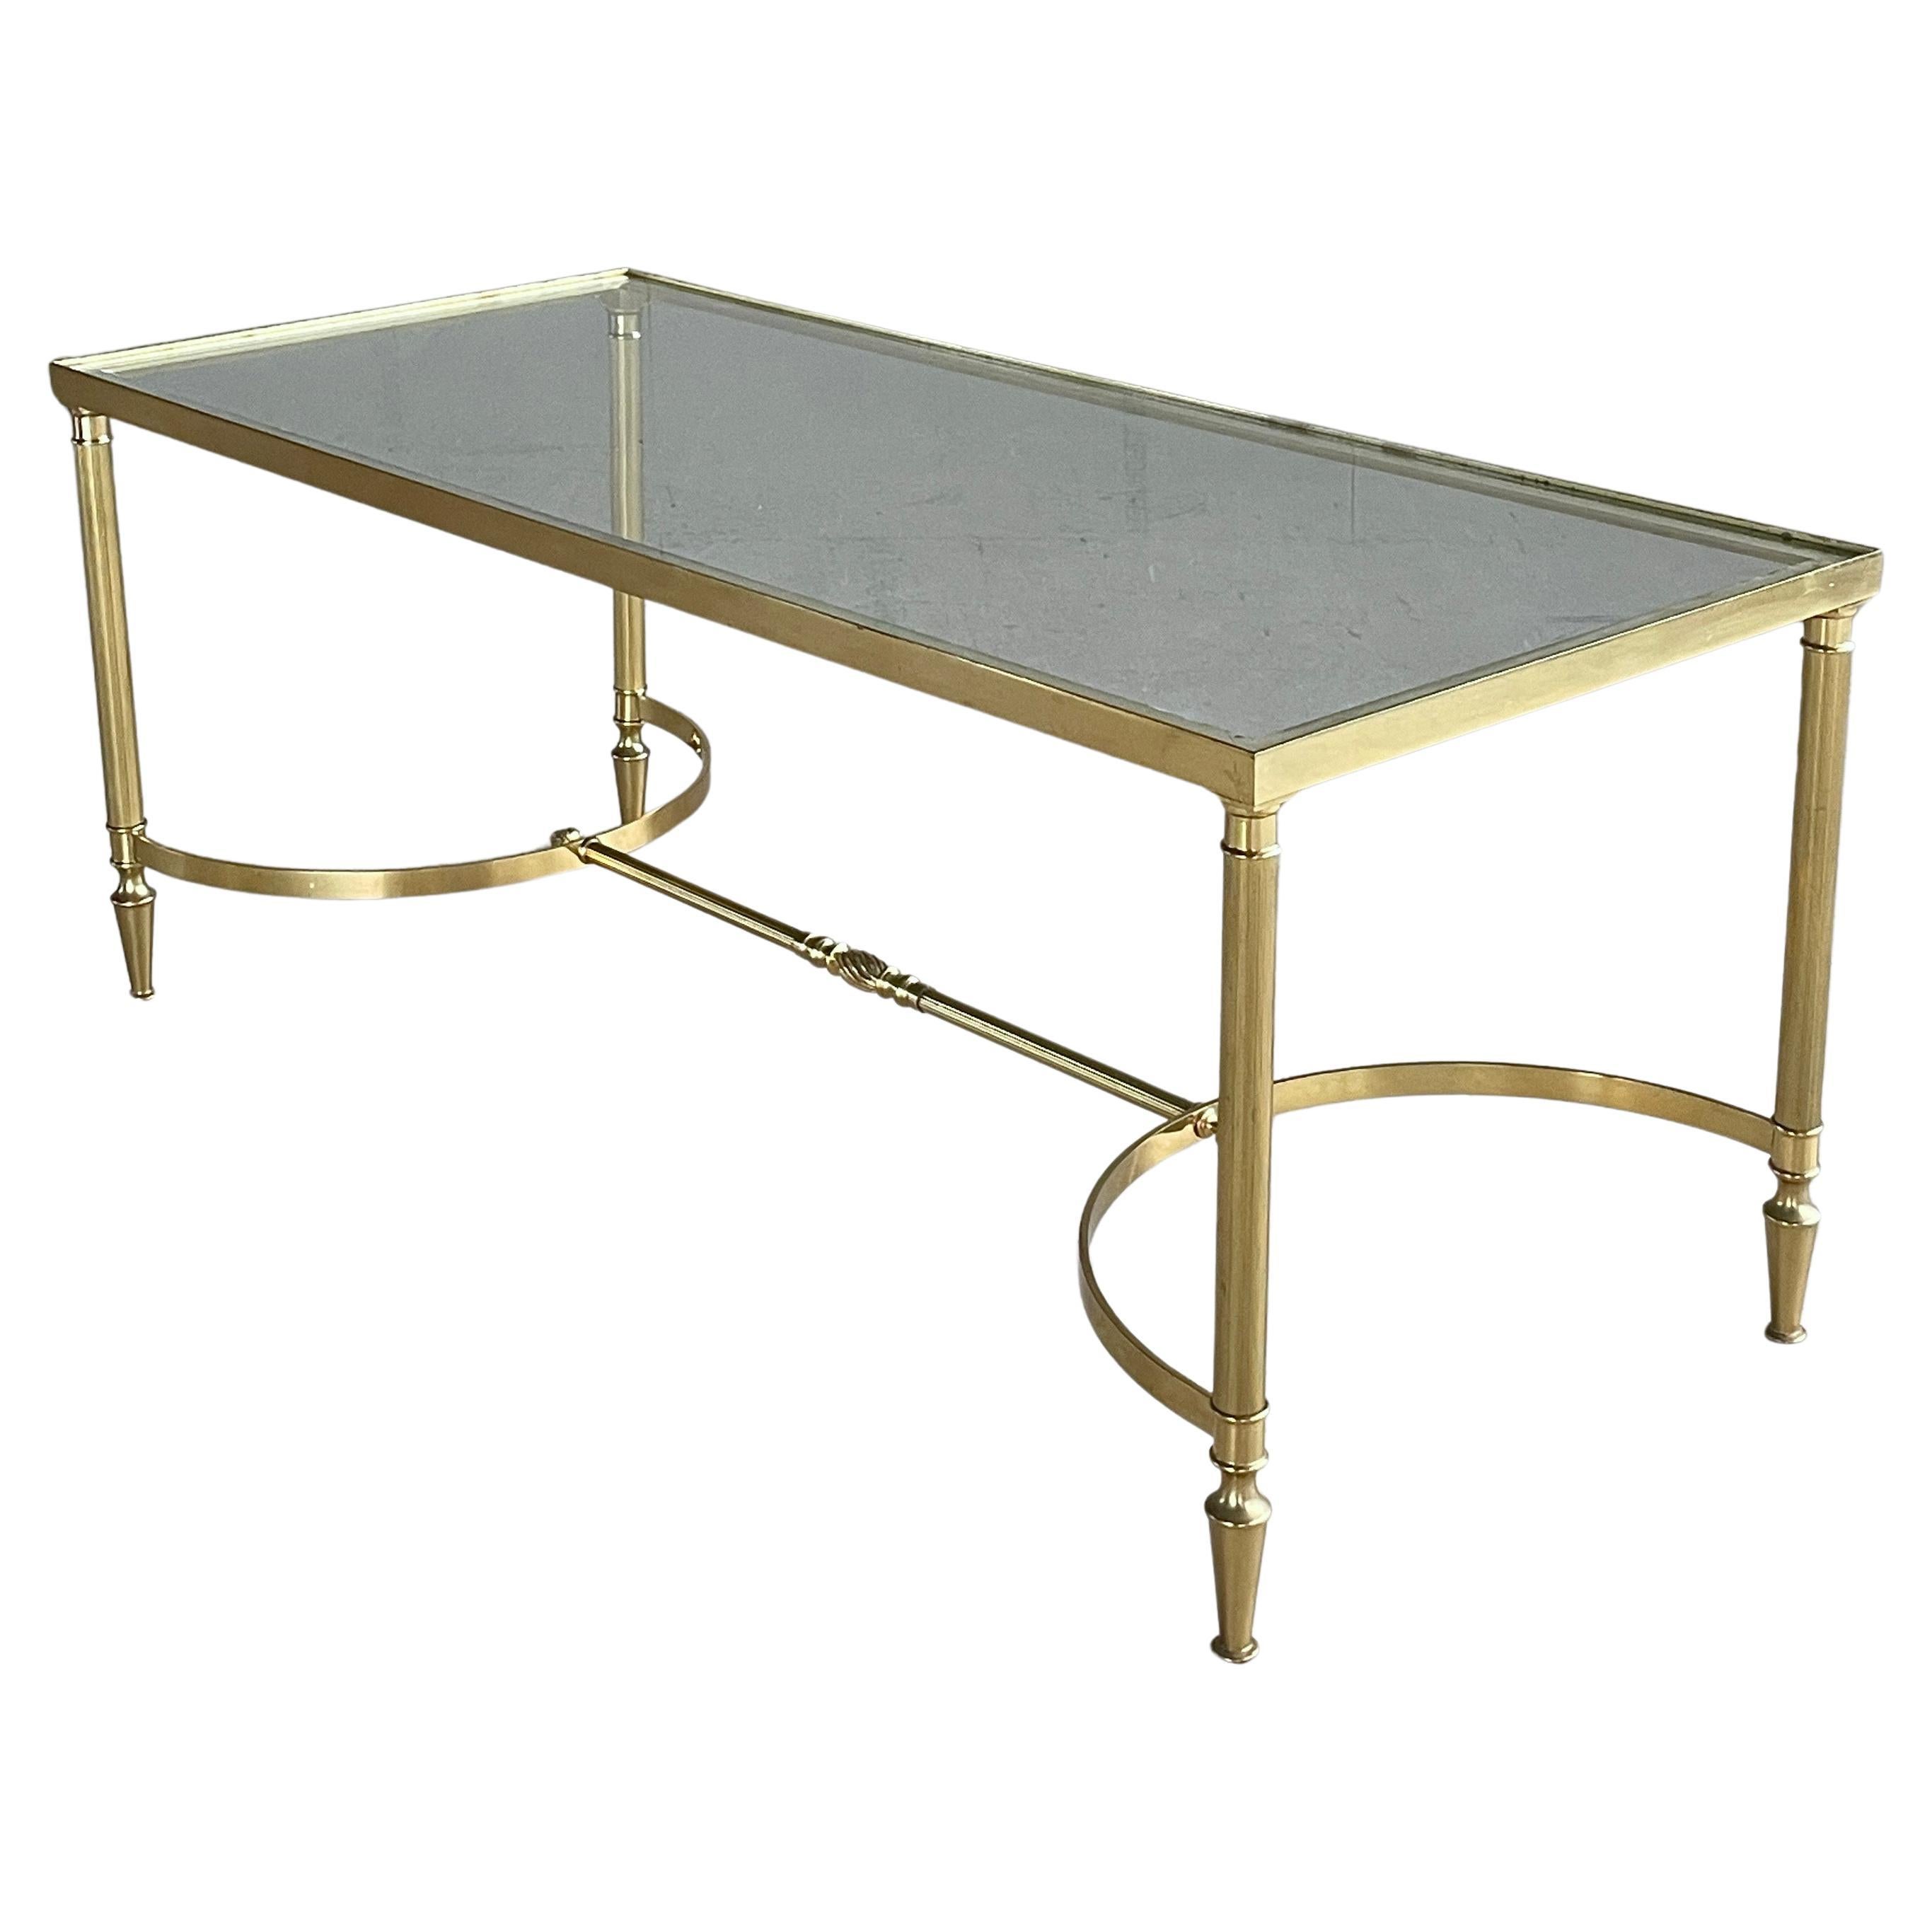 French Mid Century Neoclassical / Hollywood Regency Style brass coffee table / couch table with glass tabletop on a solid brass base. Nice detailing to base.
Designer: Unknown (In the Regency Style)
Producer: Unknown (France ca. 1950 -